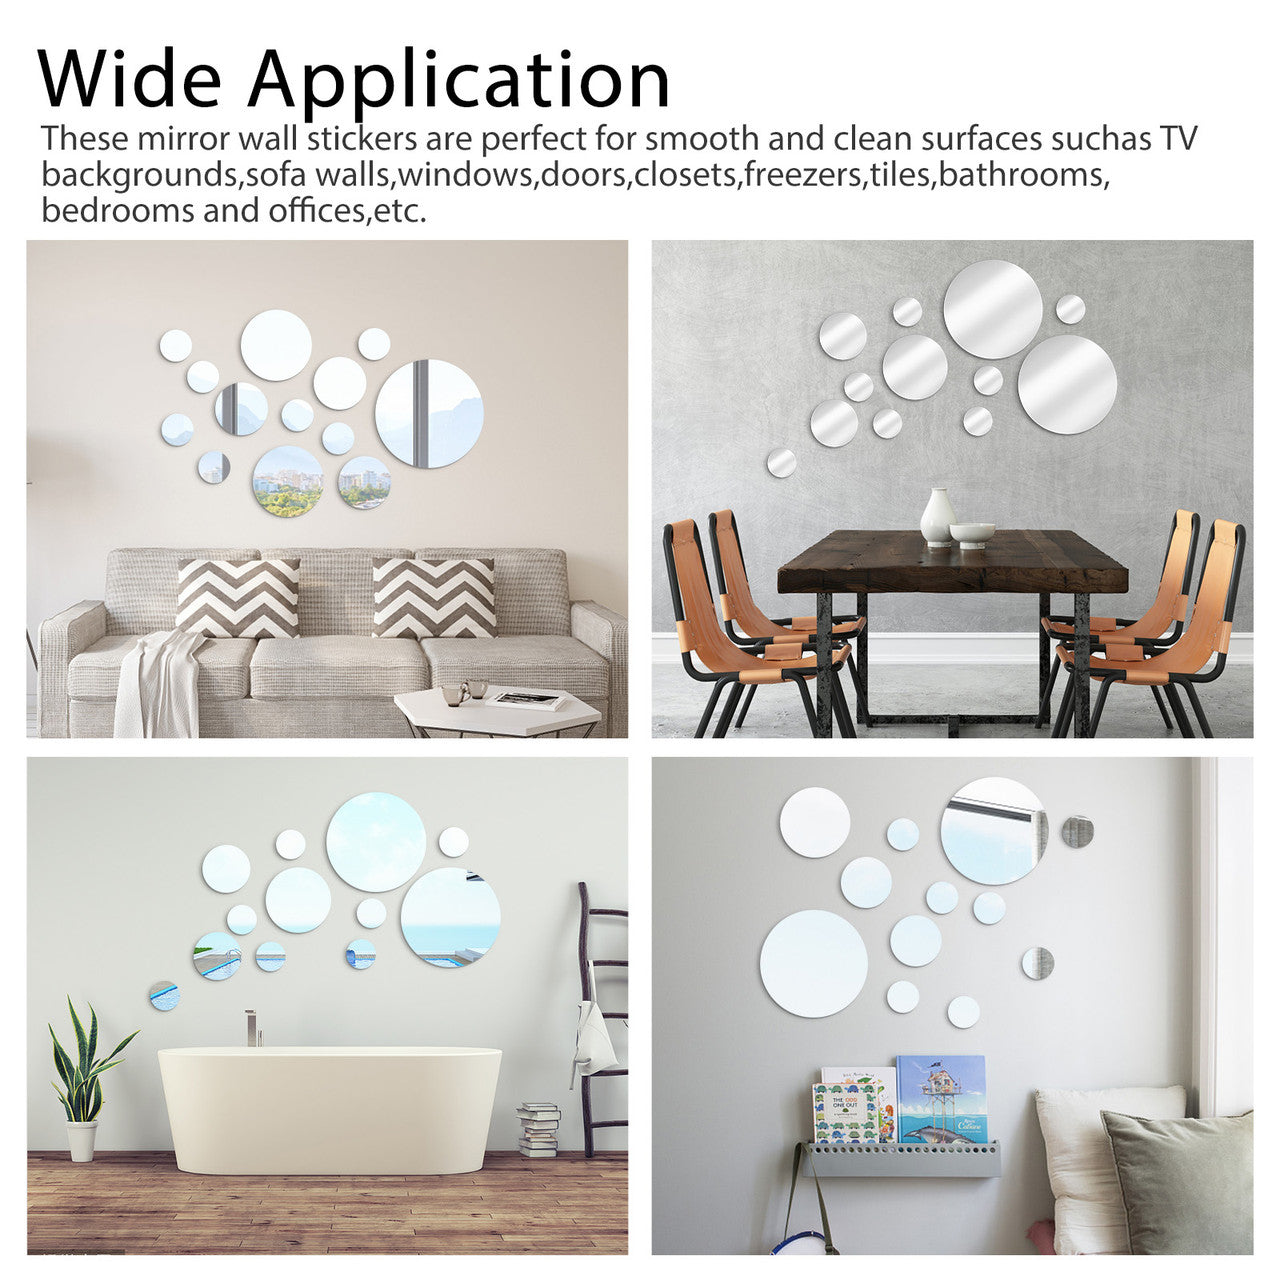 26 Pcs Removable Acrylic Mirror Wall Sticker - Adhesive Round Circle Mirror Tiles Decals for Home Living Room Bedroom Decor ( 4 different sizes)